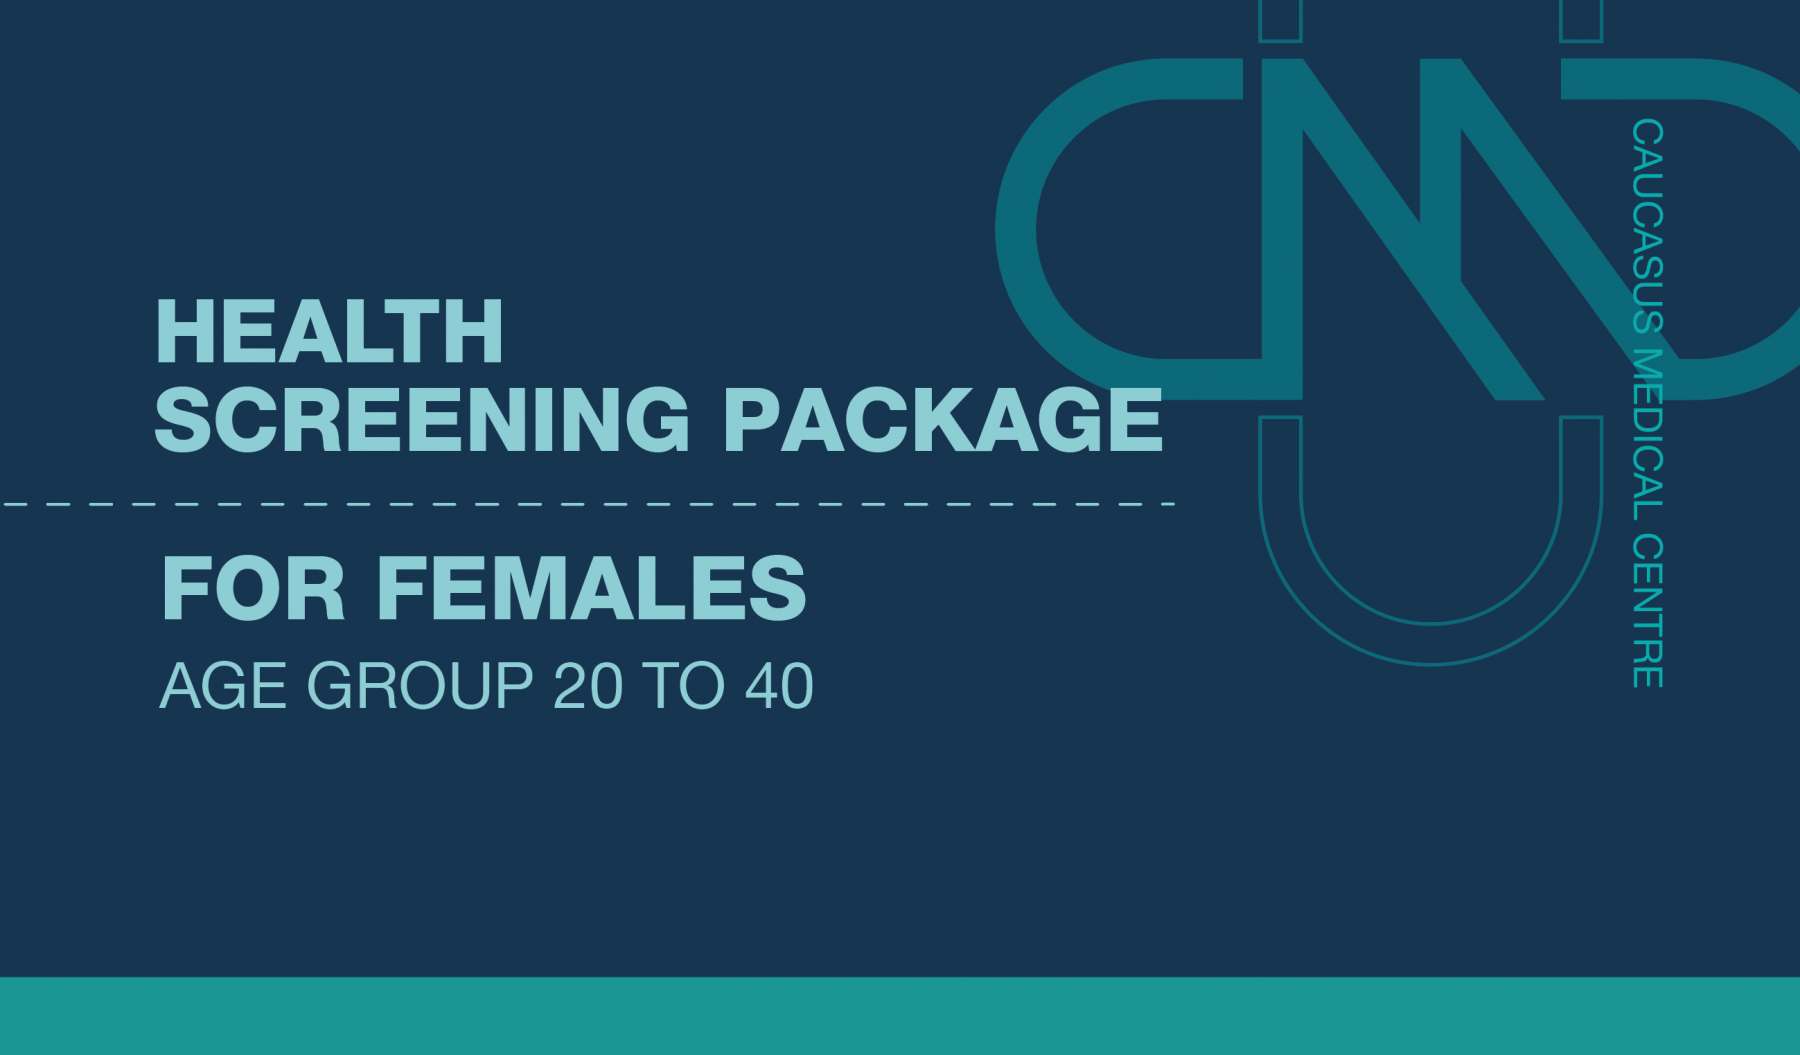 PREMIUM HEALTH SCREENING PACKAGE FOR FEMALES AGE GROUP 20 TO 40